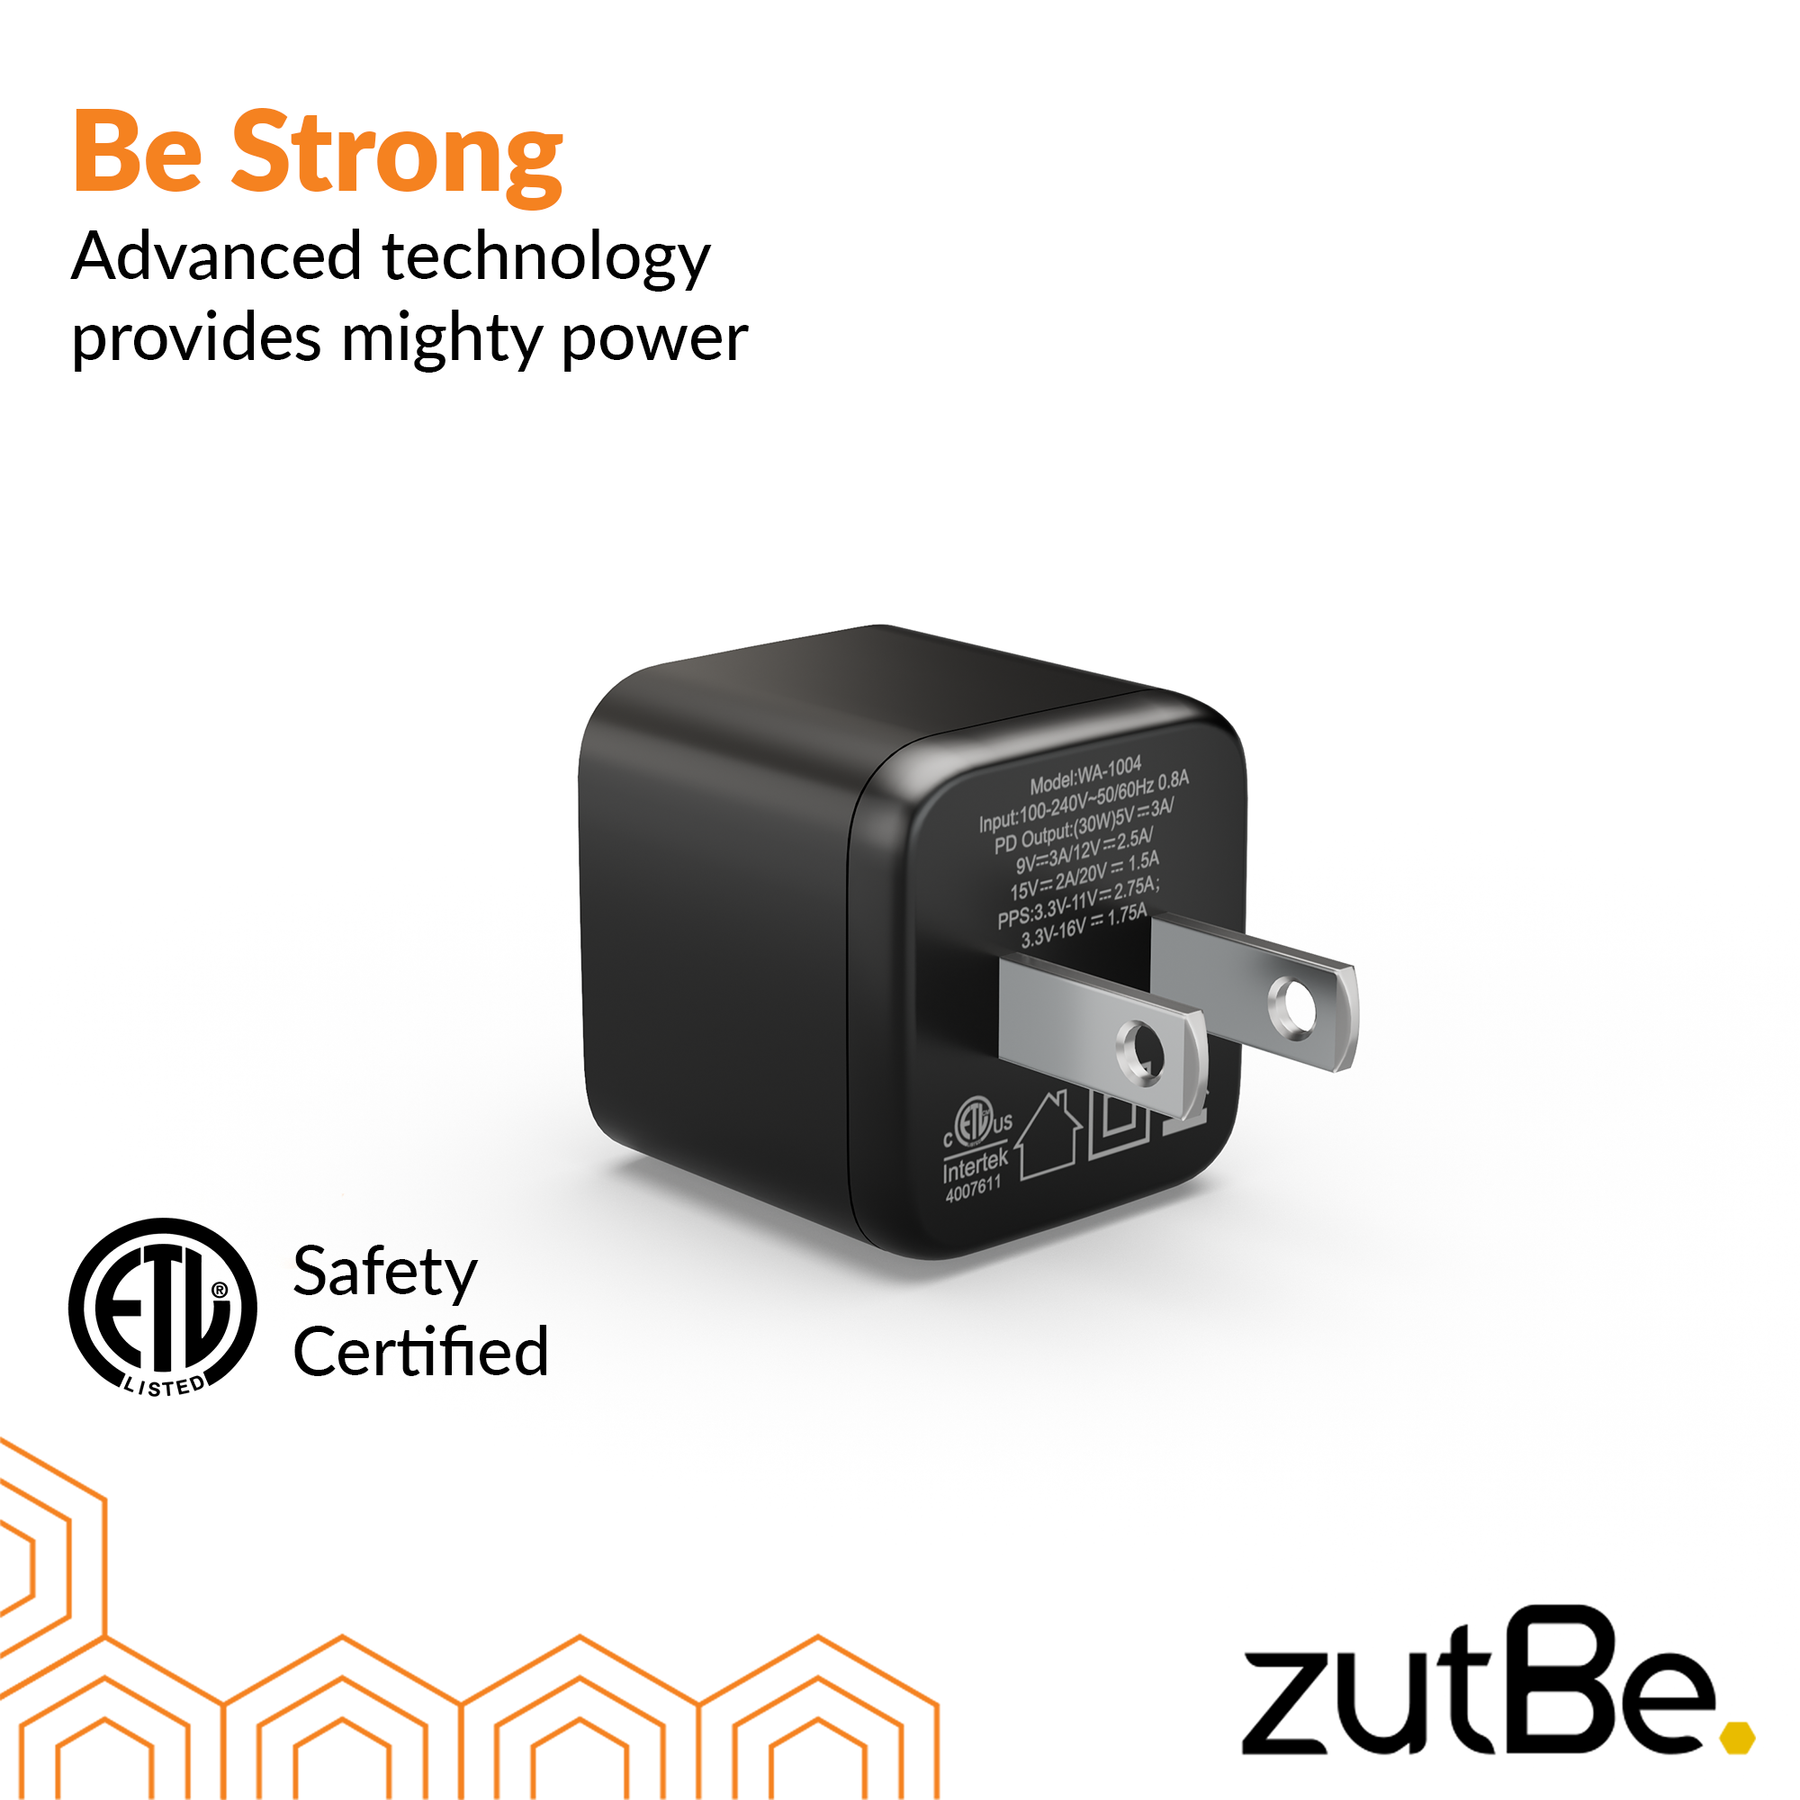 zutBe 30W Mini Wall Charger with Fixed Prongs